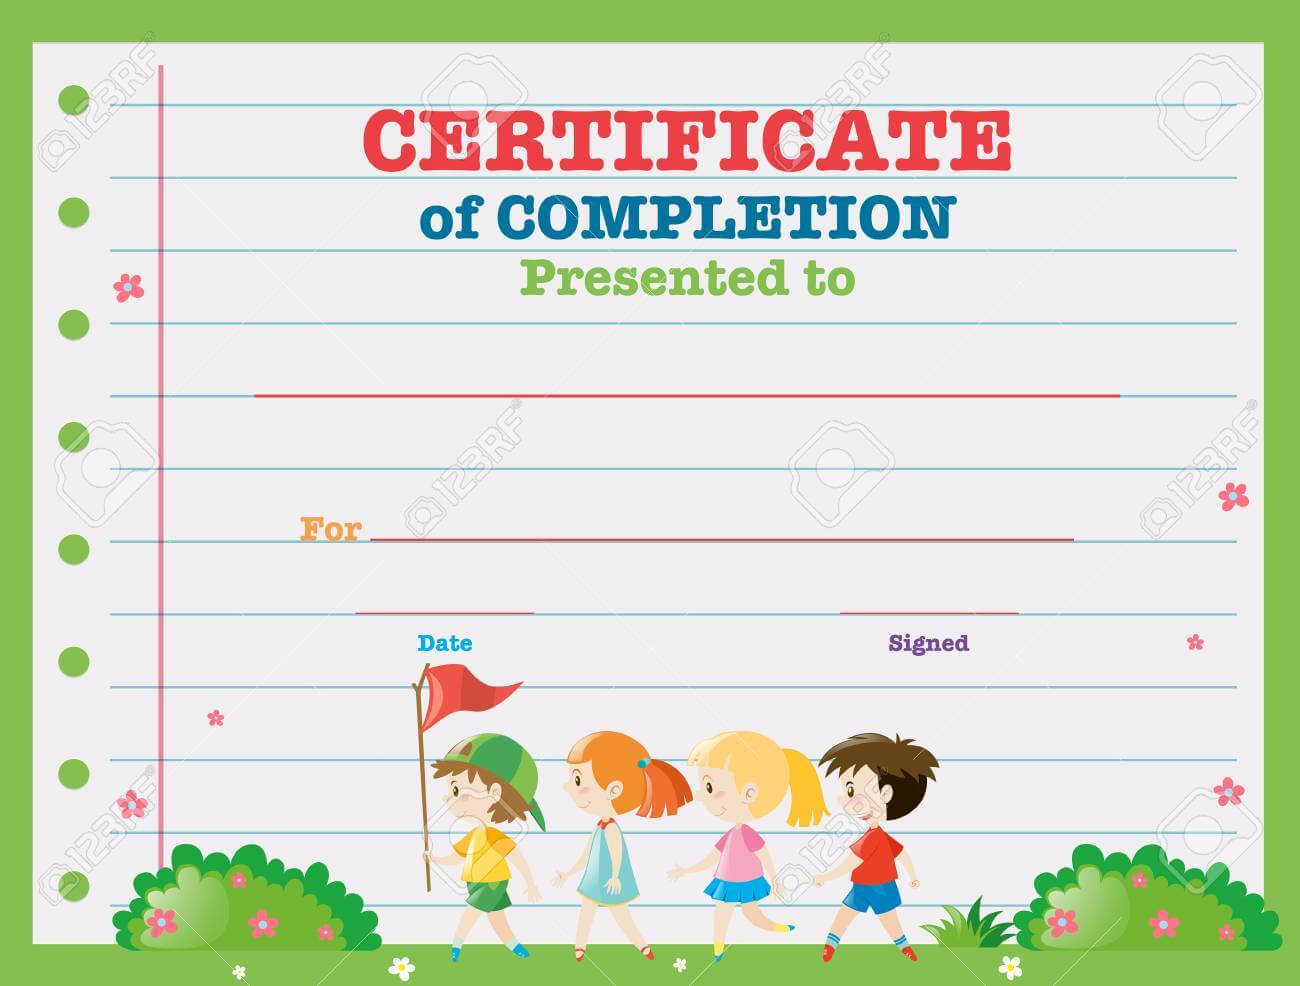 Certificate Template With Kids Walking In The Park Illustration Intended For Walking Certificate Templates